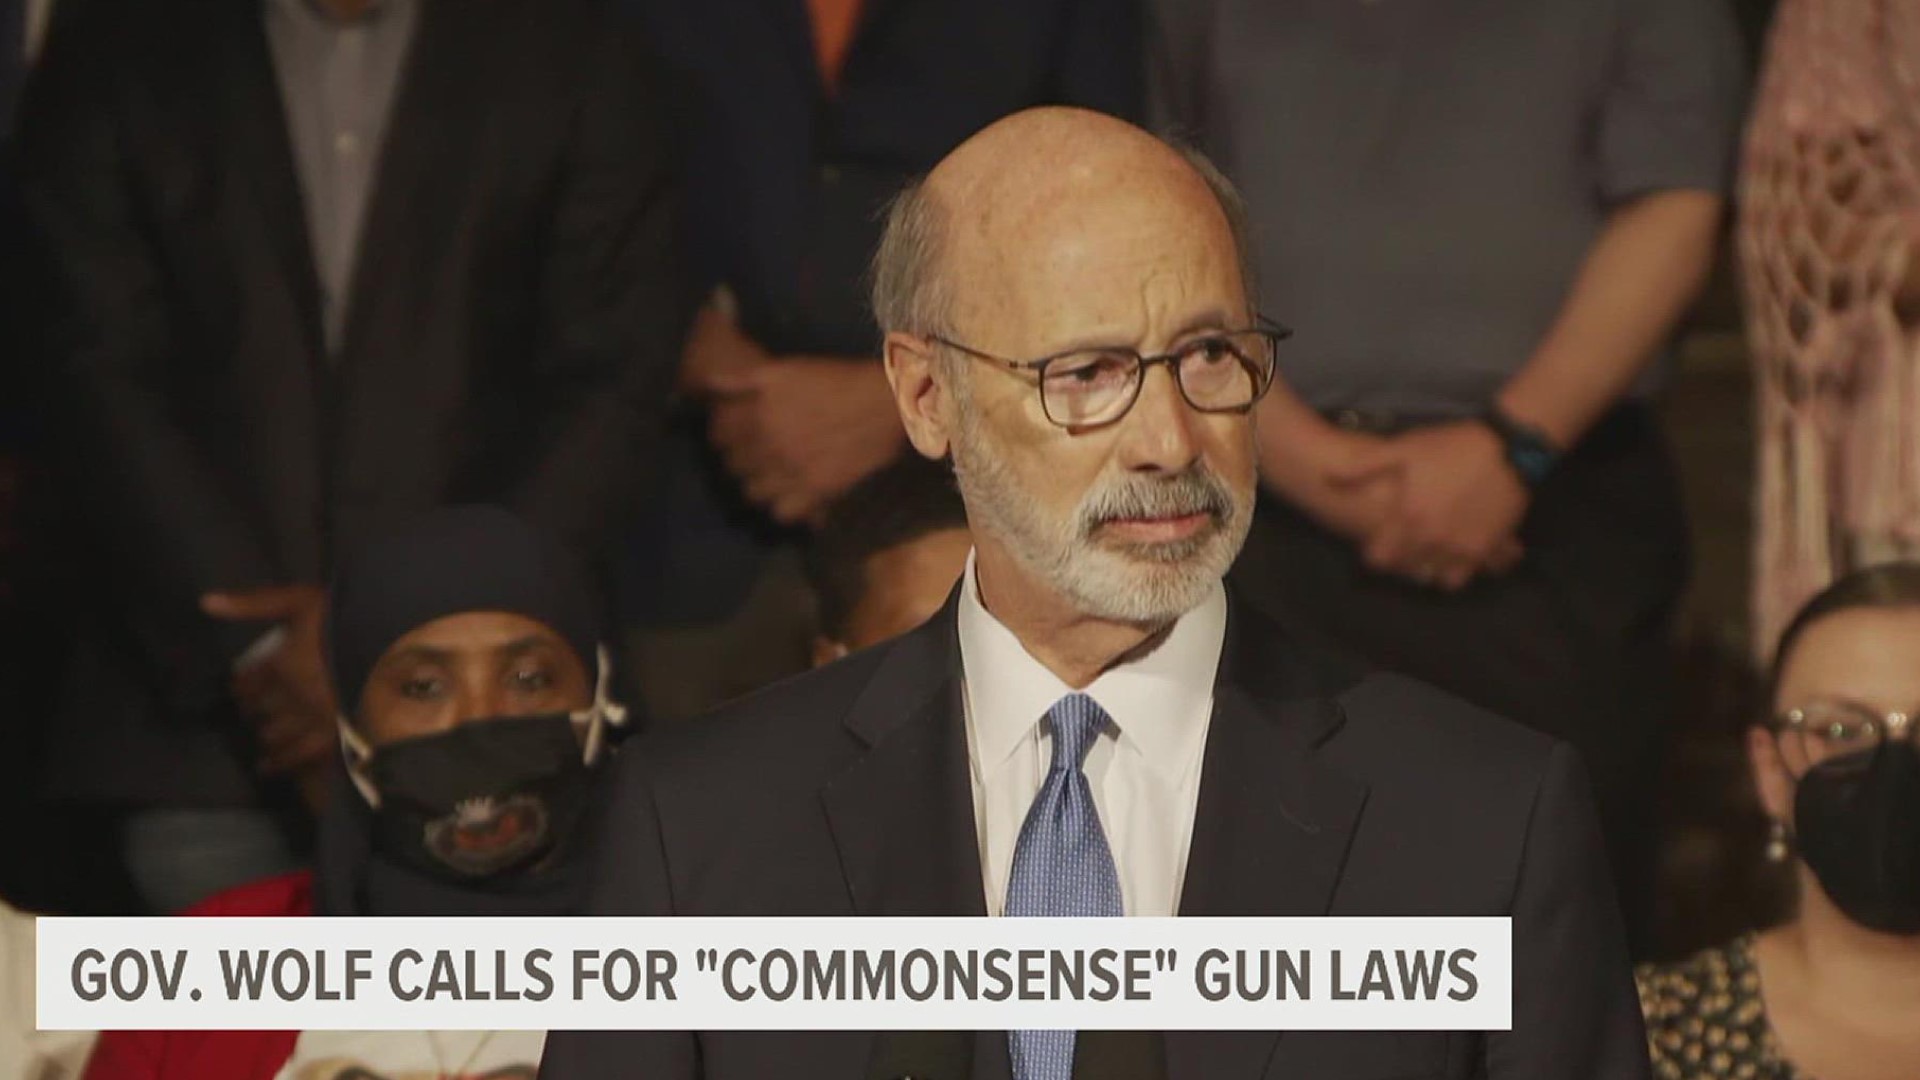 The governor spoke in Philadelphia today, calling for four gun control measures.